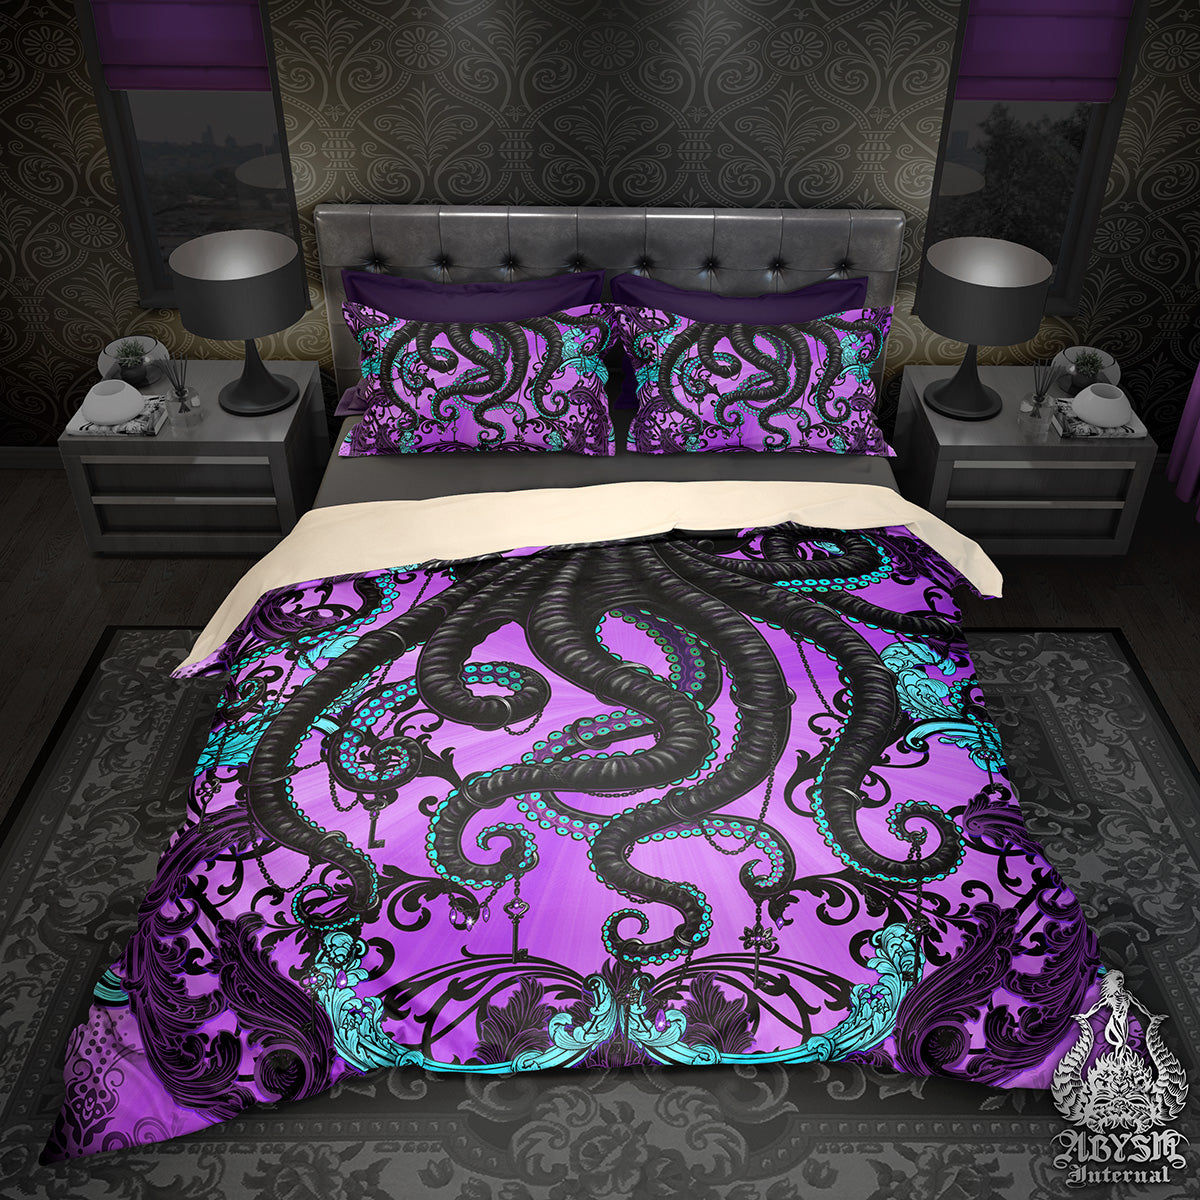 Pastel Goth Bedding Set with Octopus, Gothic Bed Cover, Duvet, Comforter and Decor by Abysm Internal